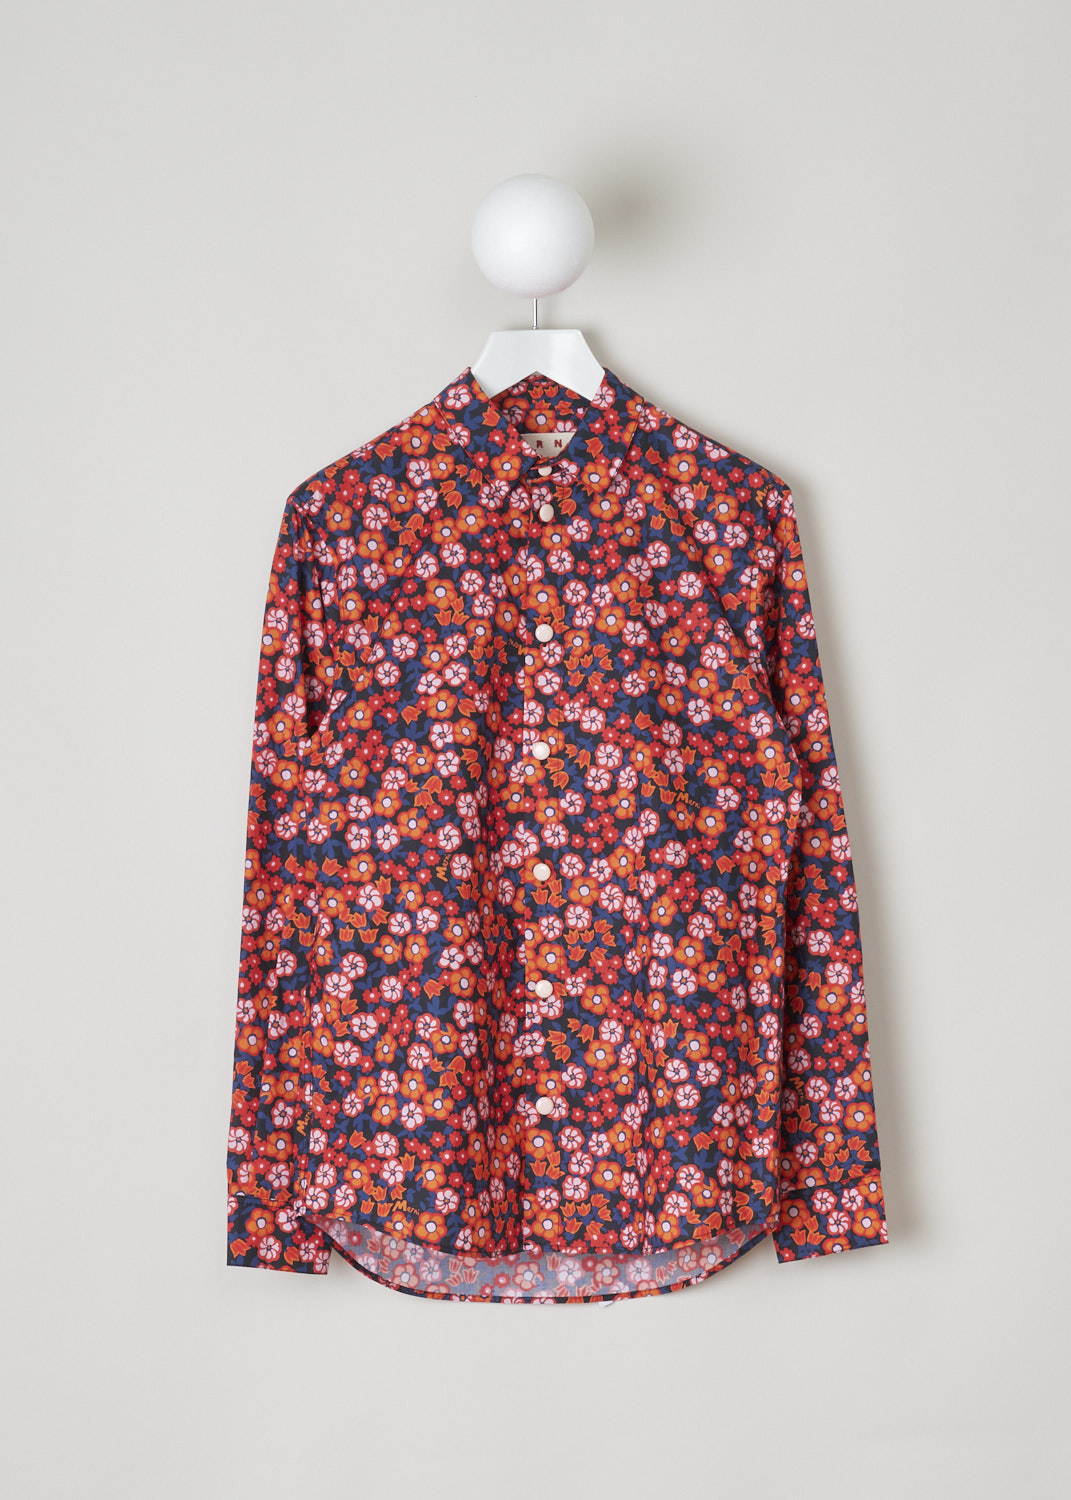 Marni, Red and blue floral blouse, CAMA0403A0_UTCZ54_PGN99, red blue white, front, Spice up your spring with this lovely floral blouse. Designed in a classic blouse model, with the pointed collar and long cuffed sleeves. A unique feature about this model are the buttons, which are called half ball buttons. They have a smooth and round surface.  